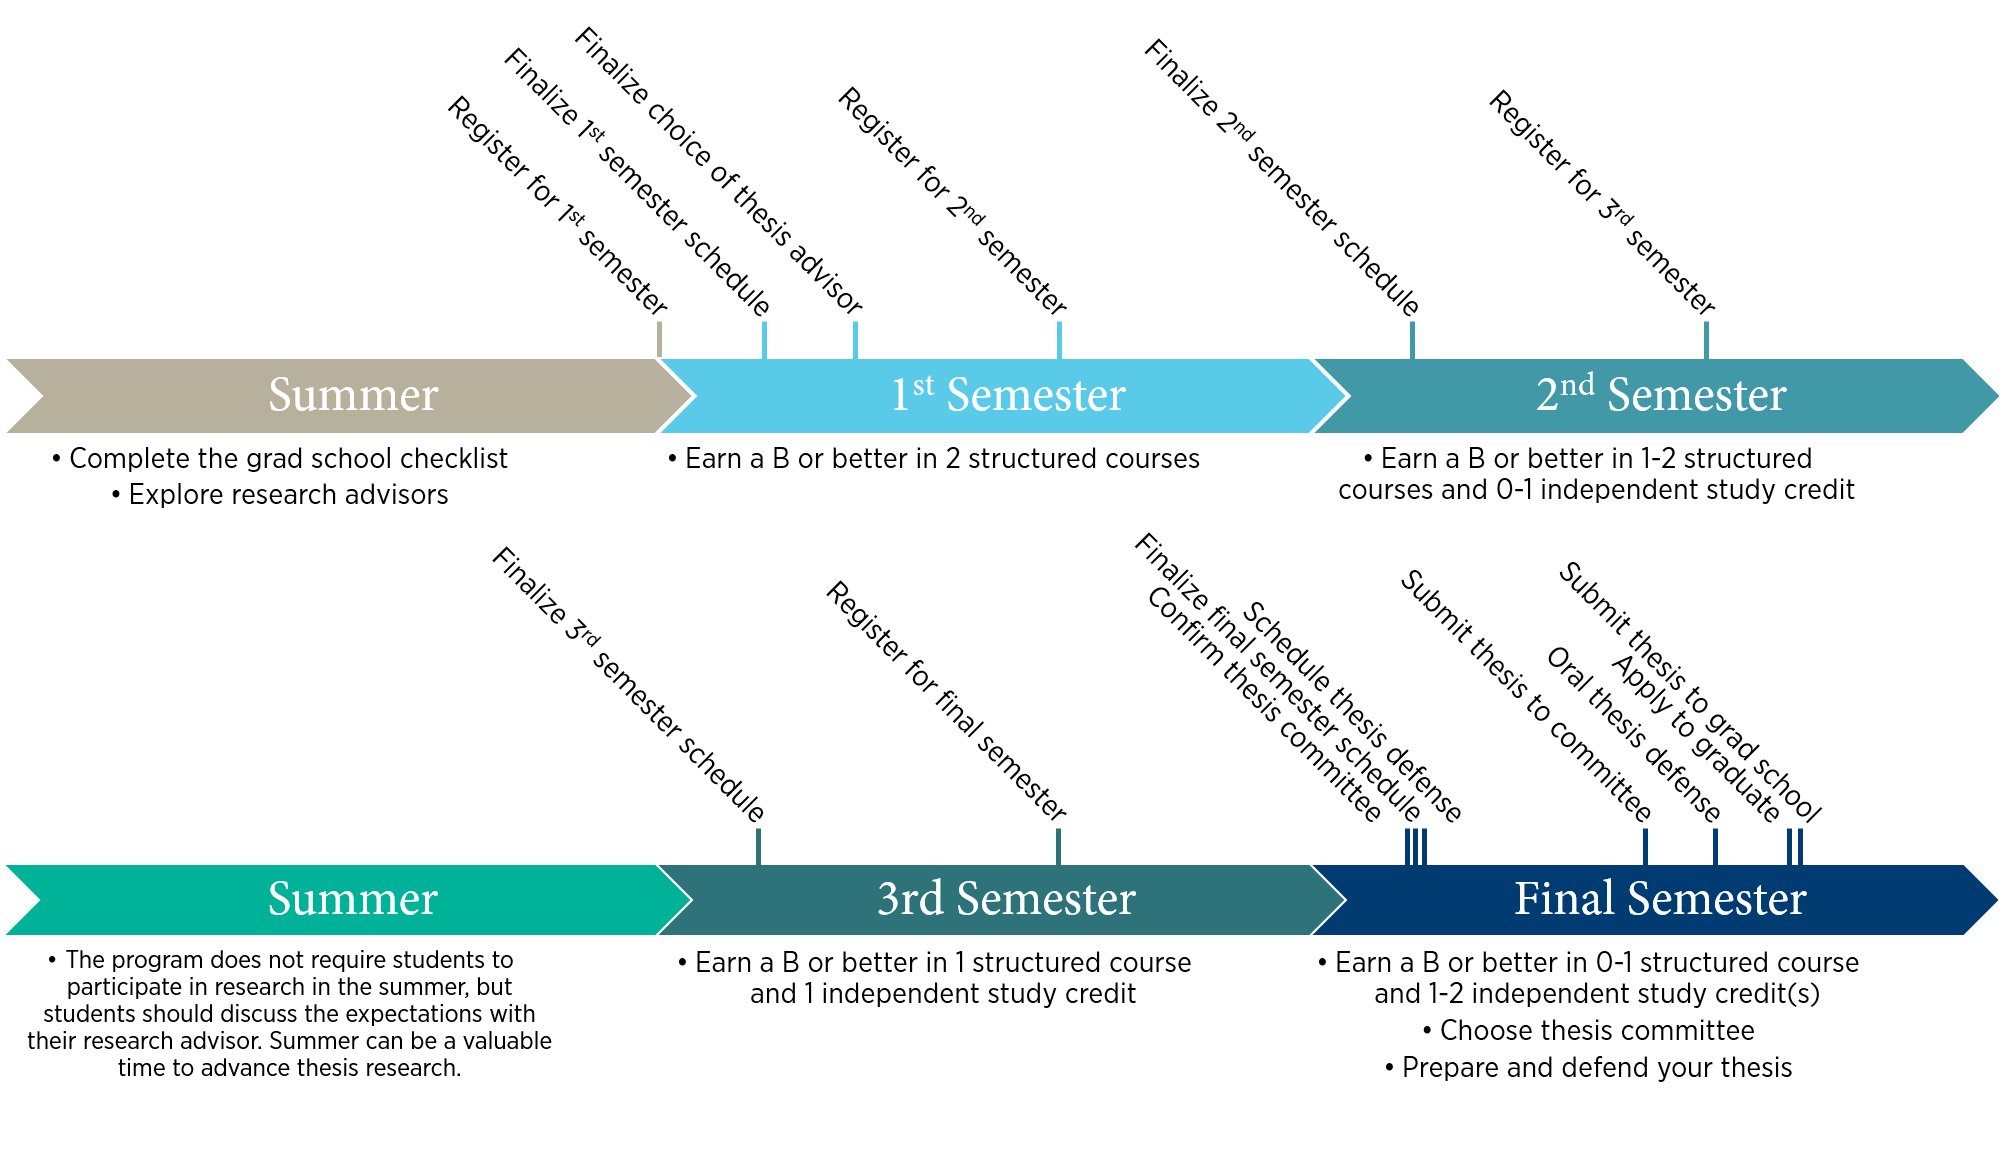 Masters thesis timeline